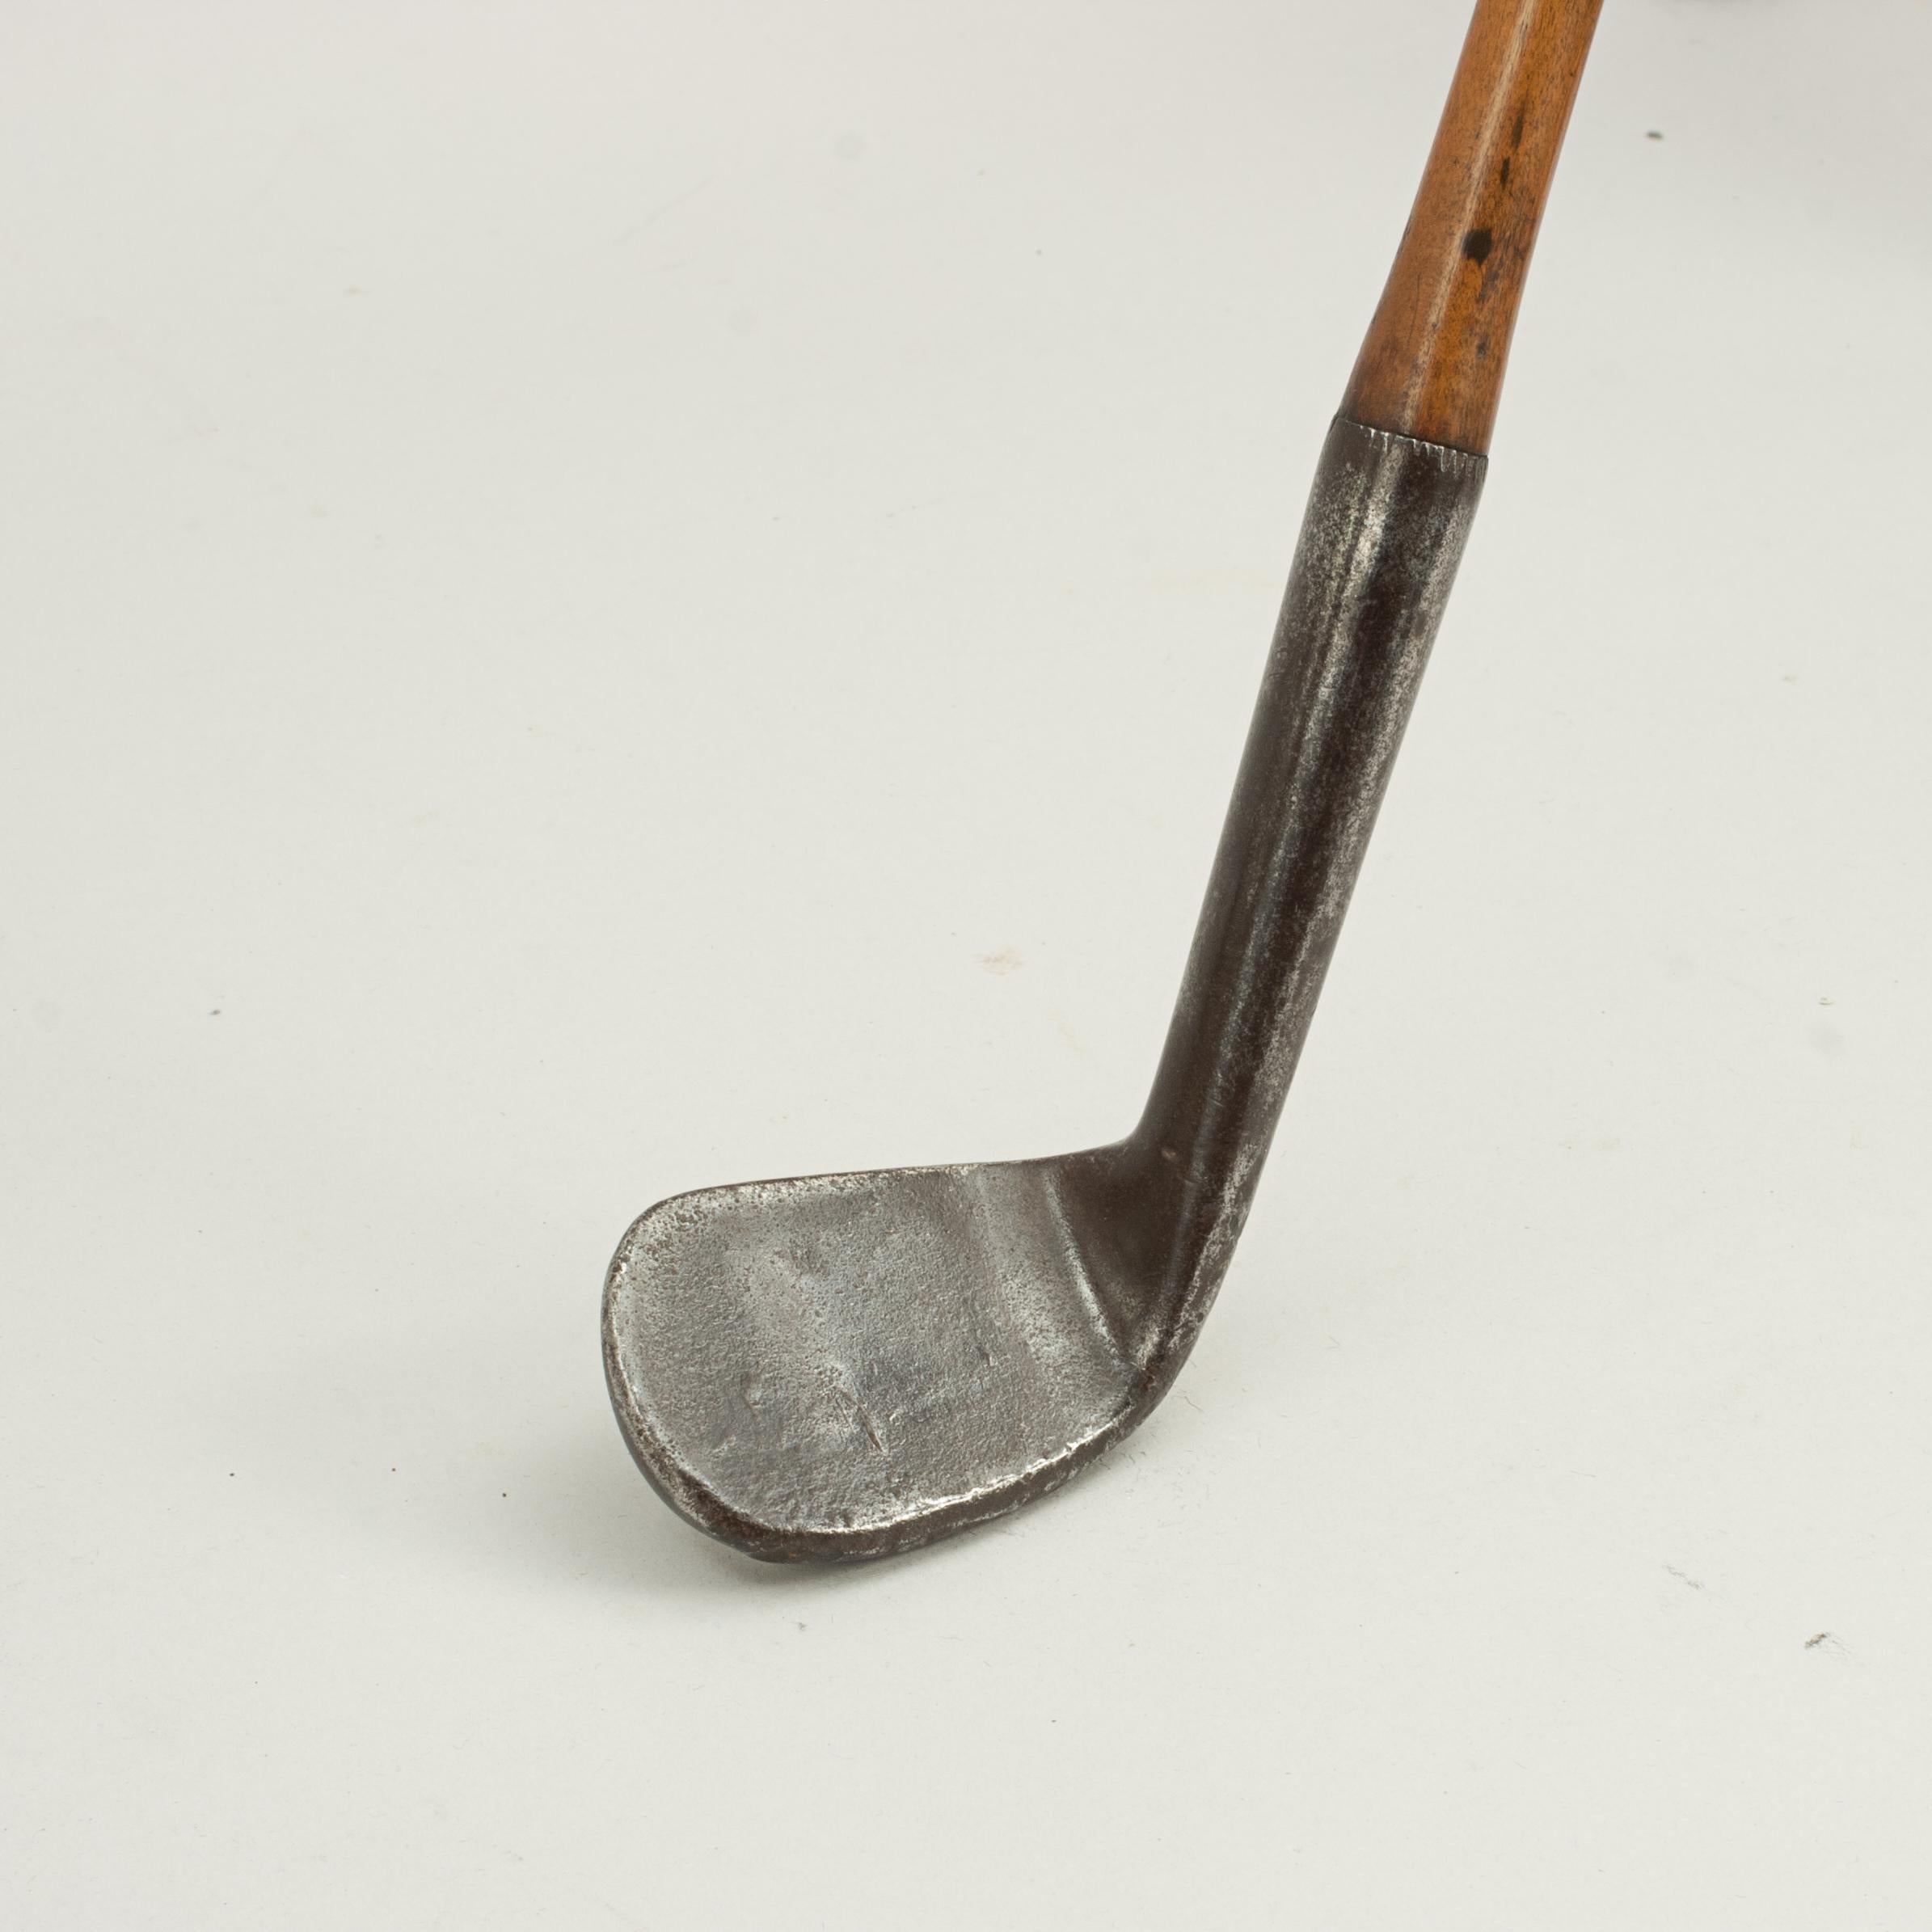 Hickory Shafted Army & Navy Rut Iron.
A rare good quality early smooth faced rut iron, also known as a rut niblick, rutter or track iron. Rut irons were commonly used to hit the ball from cart tracks and deep ruts etc. Young Tom Morris was known to